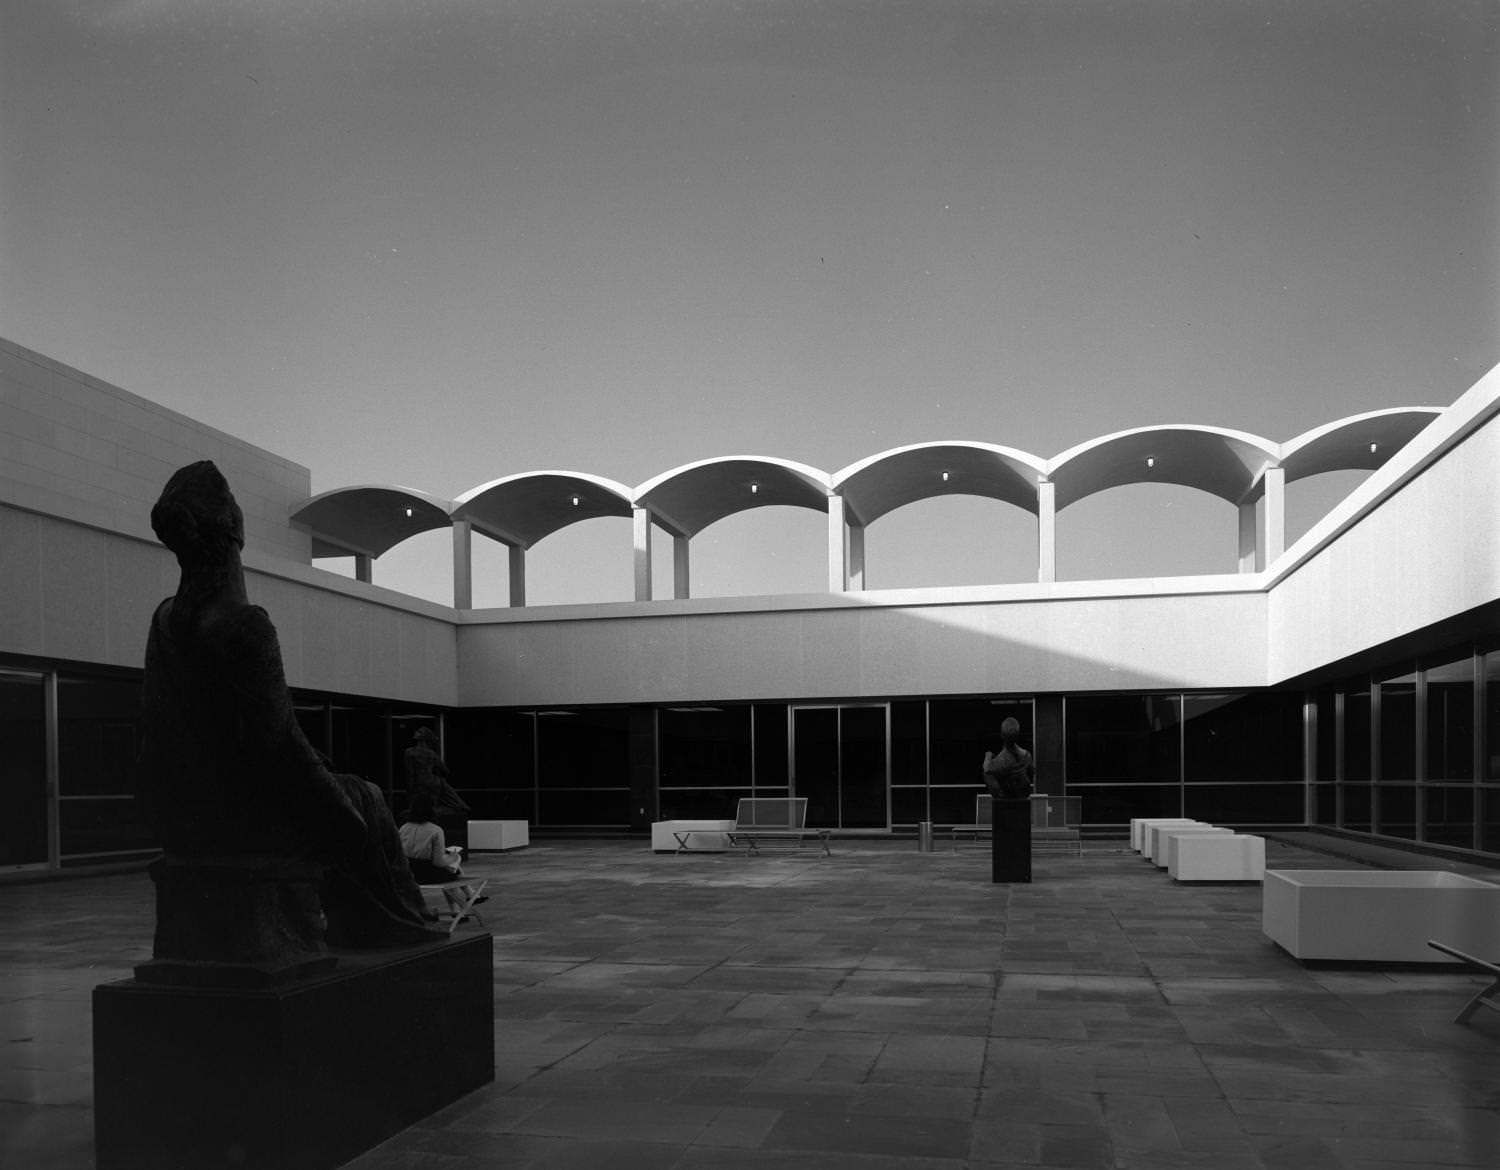 Peter T. Flawn Academic Center roof courtyard, 1964